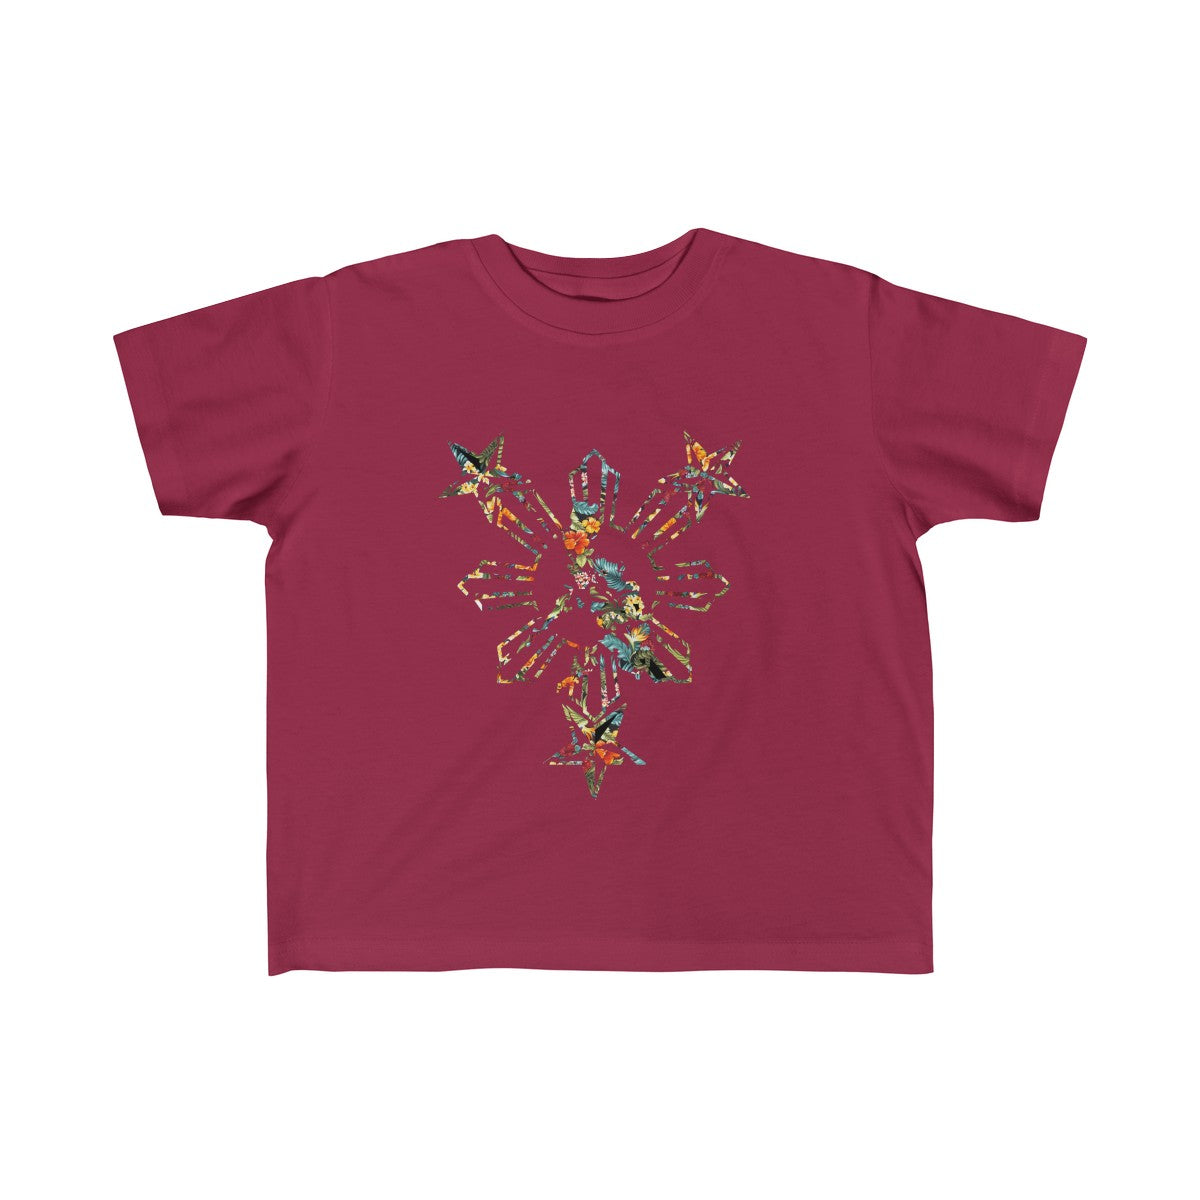 Philippines 3 Star and Sun Floral Tee Kids